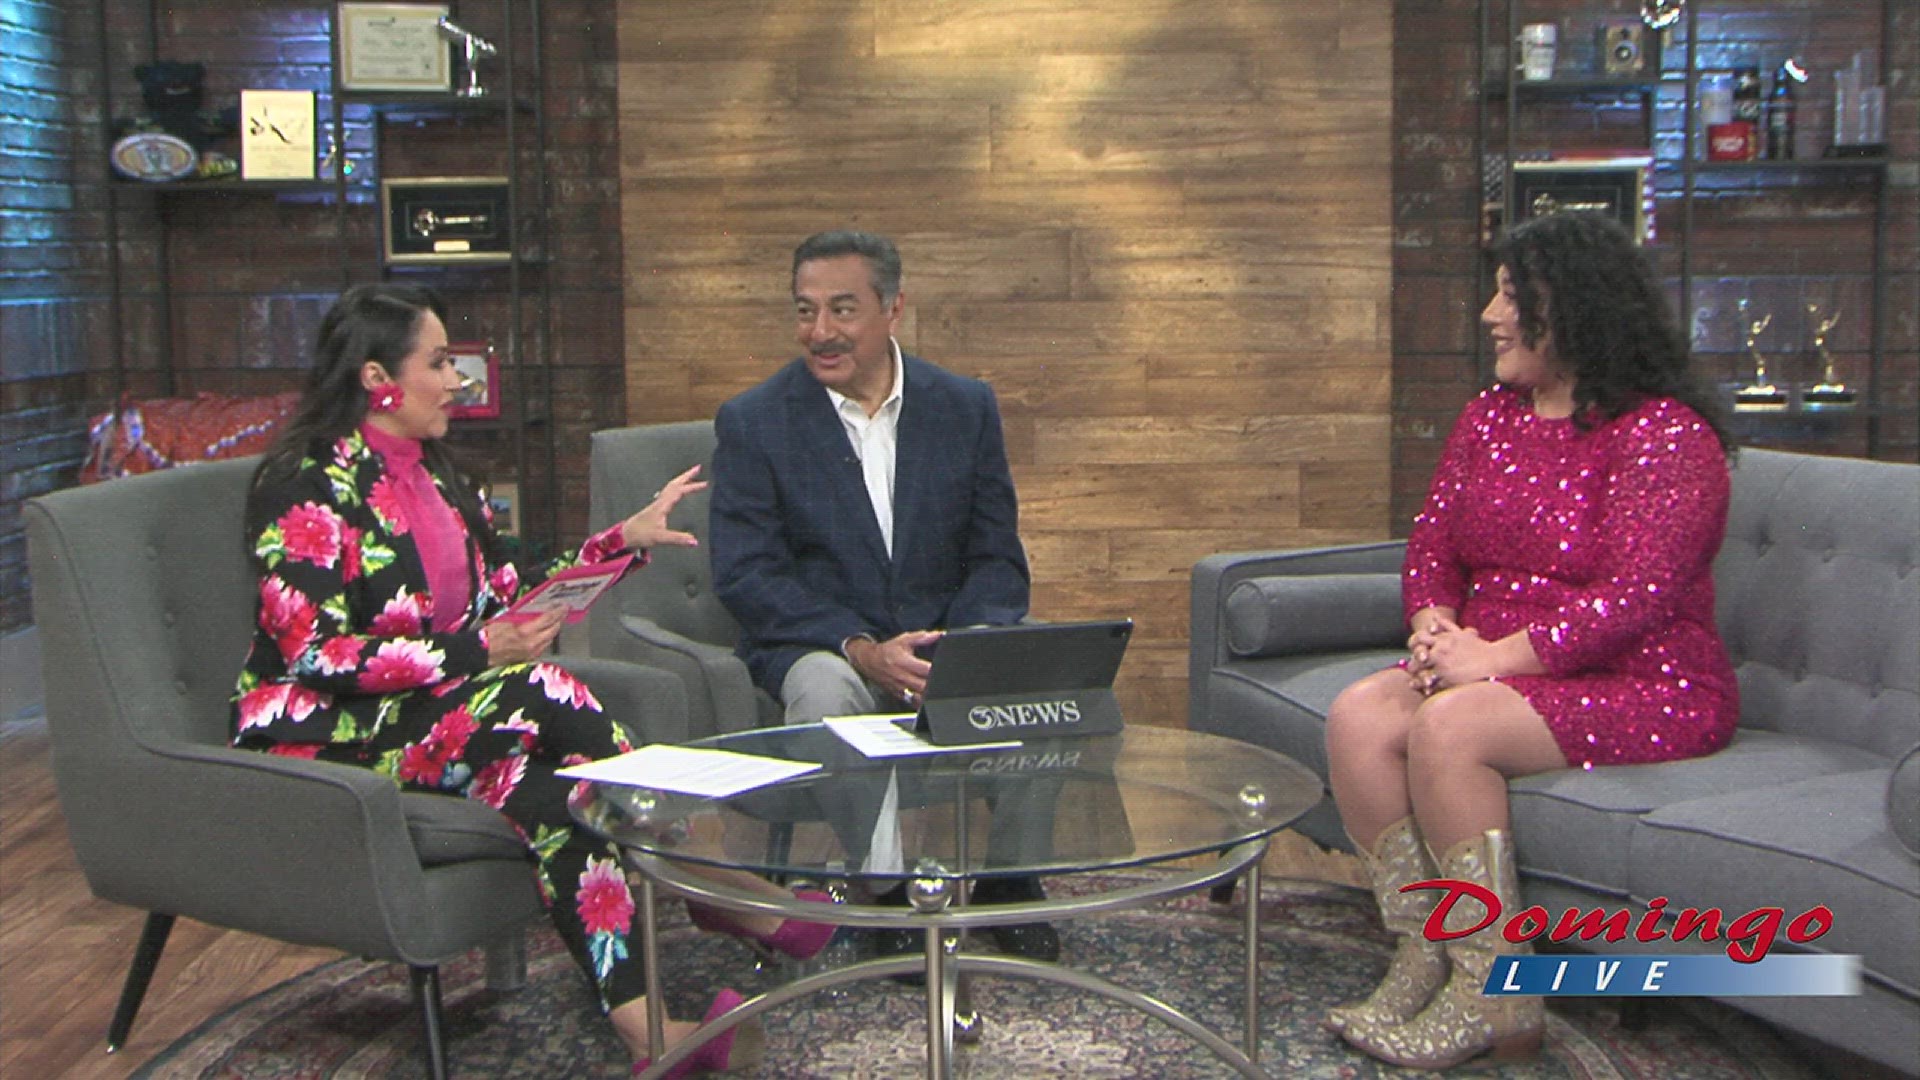 Sarah Monique joined us live to discuss how she hopes to both empower women and celebrate her faith as a Tejano-Gospel musician.